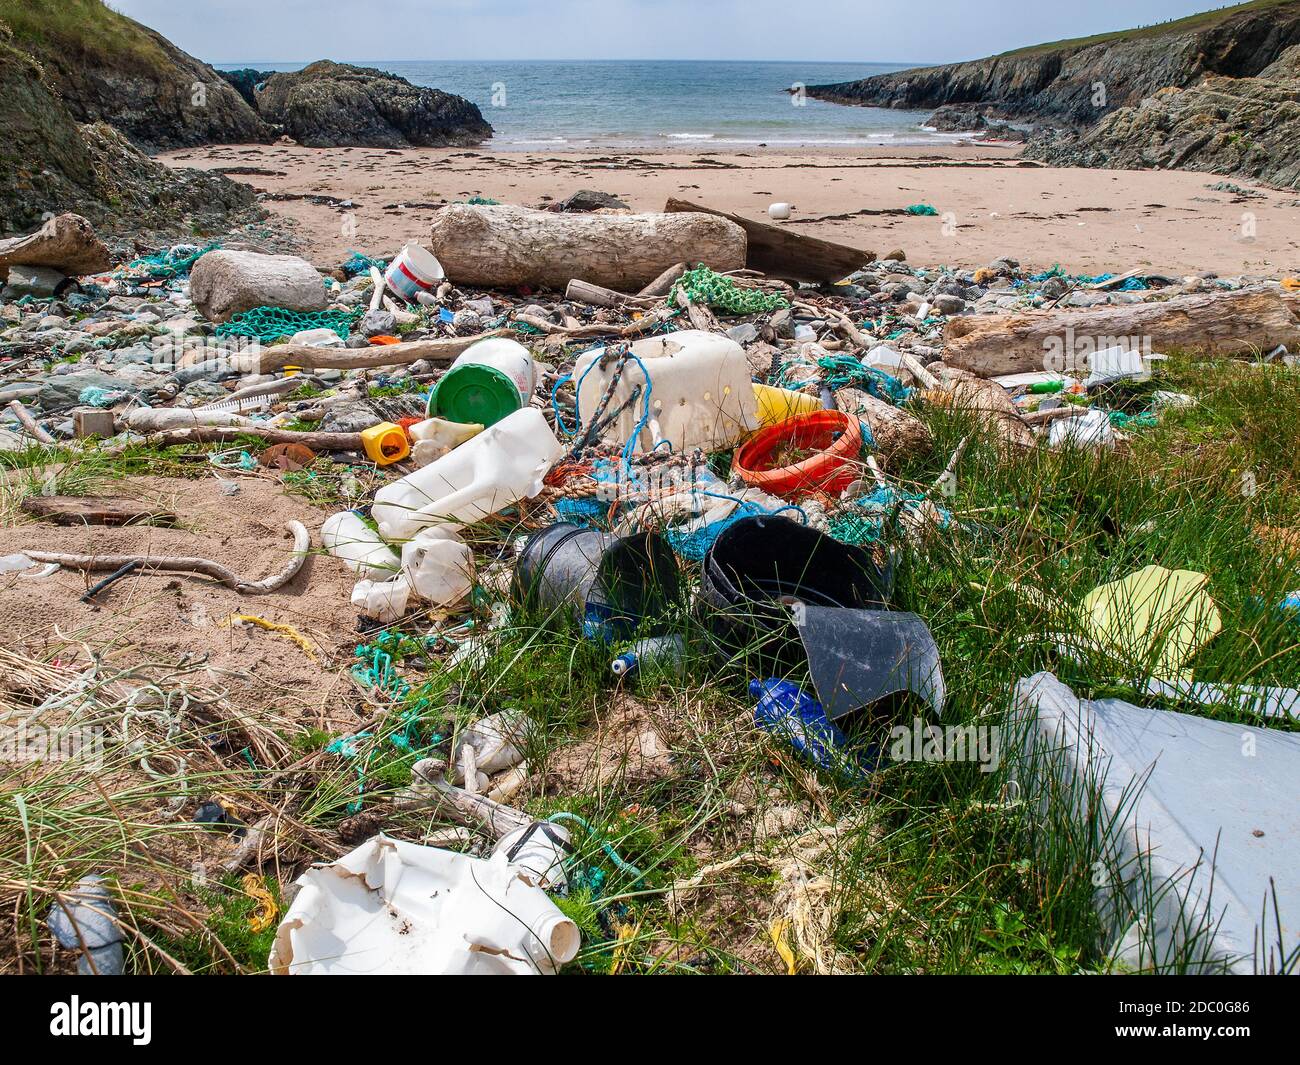 Rubbish and Plastic waste on a beach, Anglesey, Wales, UK Stock Photo